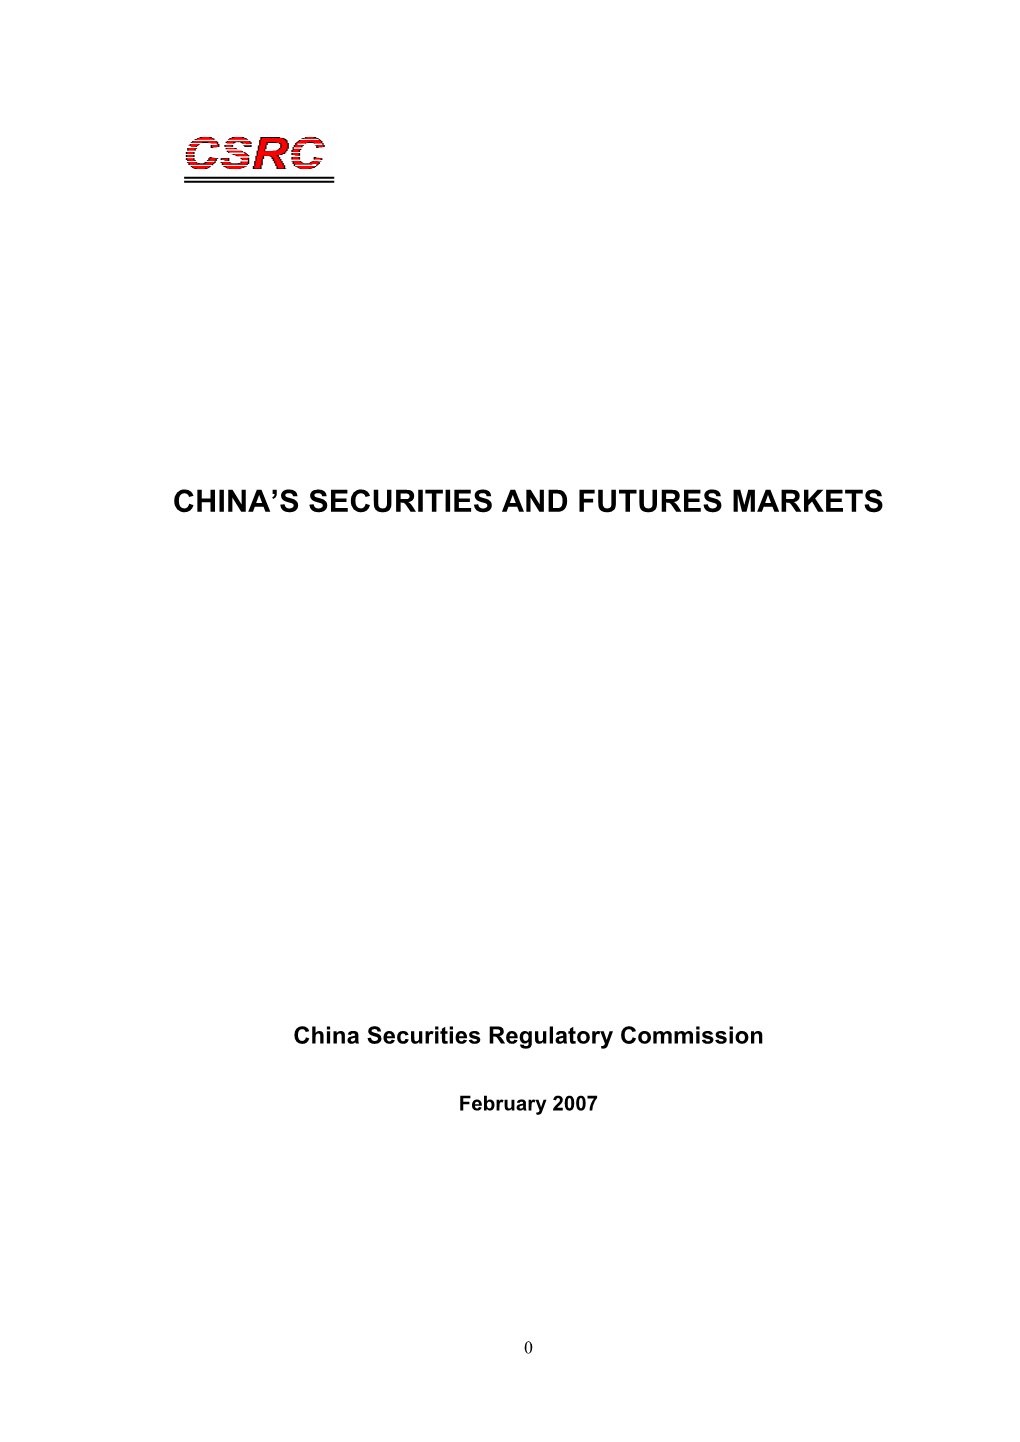 China's Securities and Futures Markets 2007